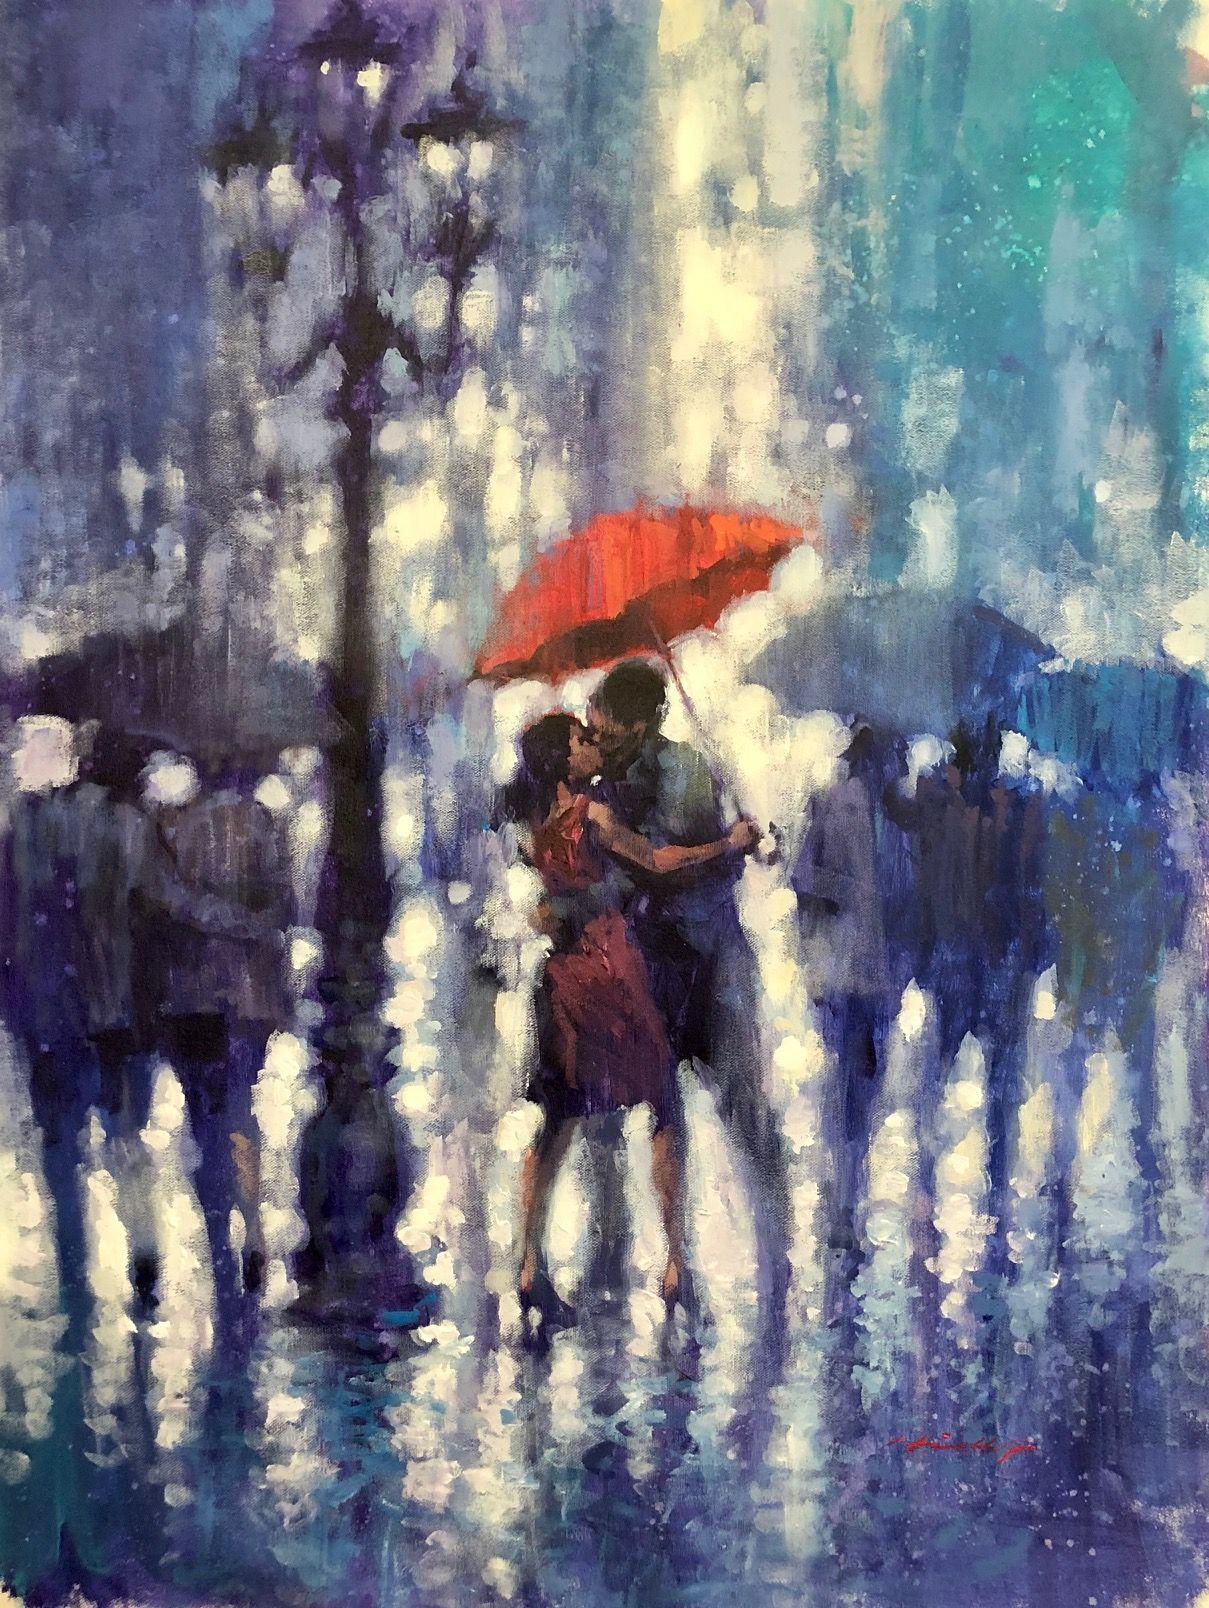 David Hinchliffe Portrait Painting - The Kiss - Lovers in the Rain: Oil on Canvas